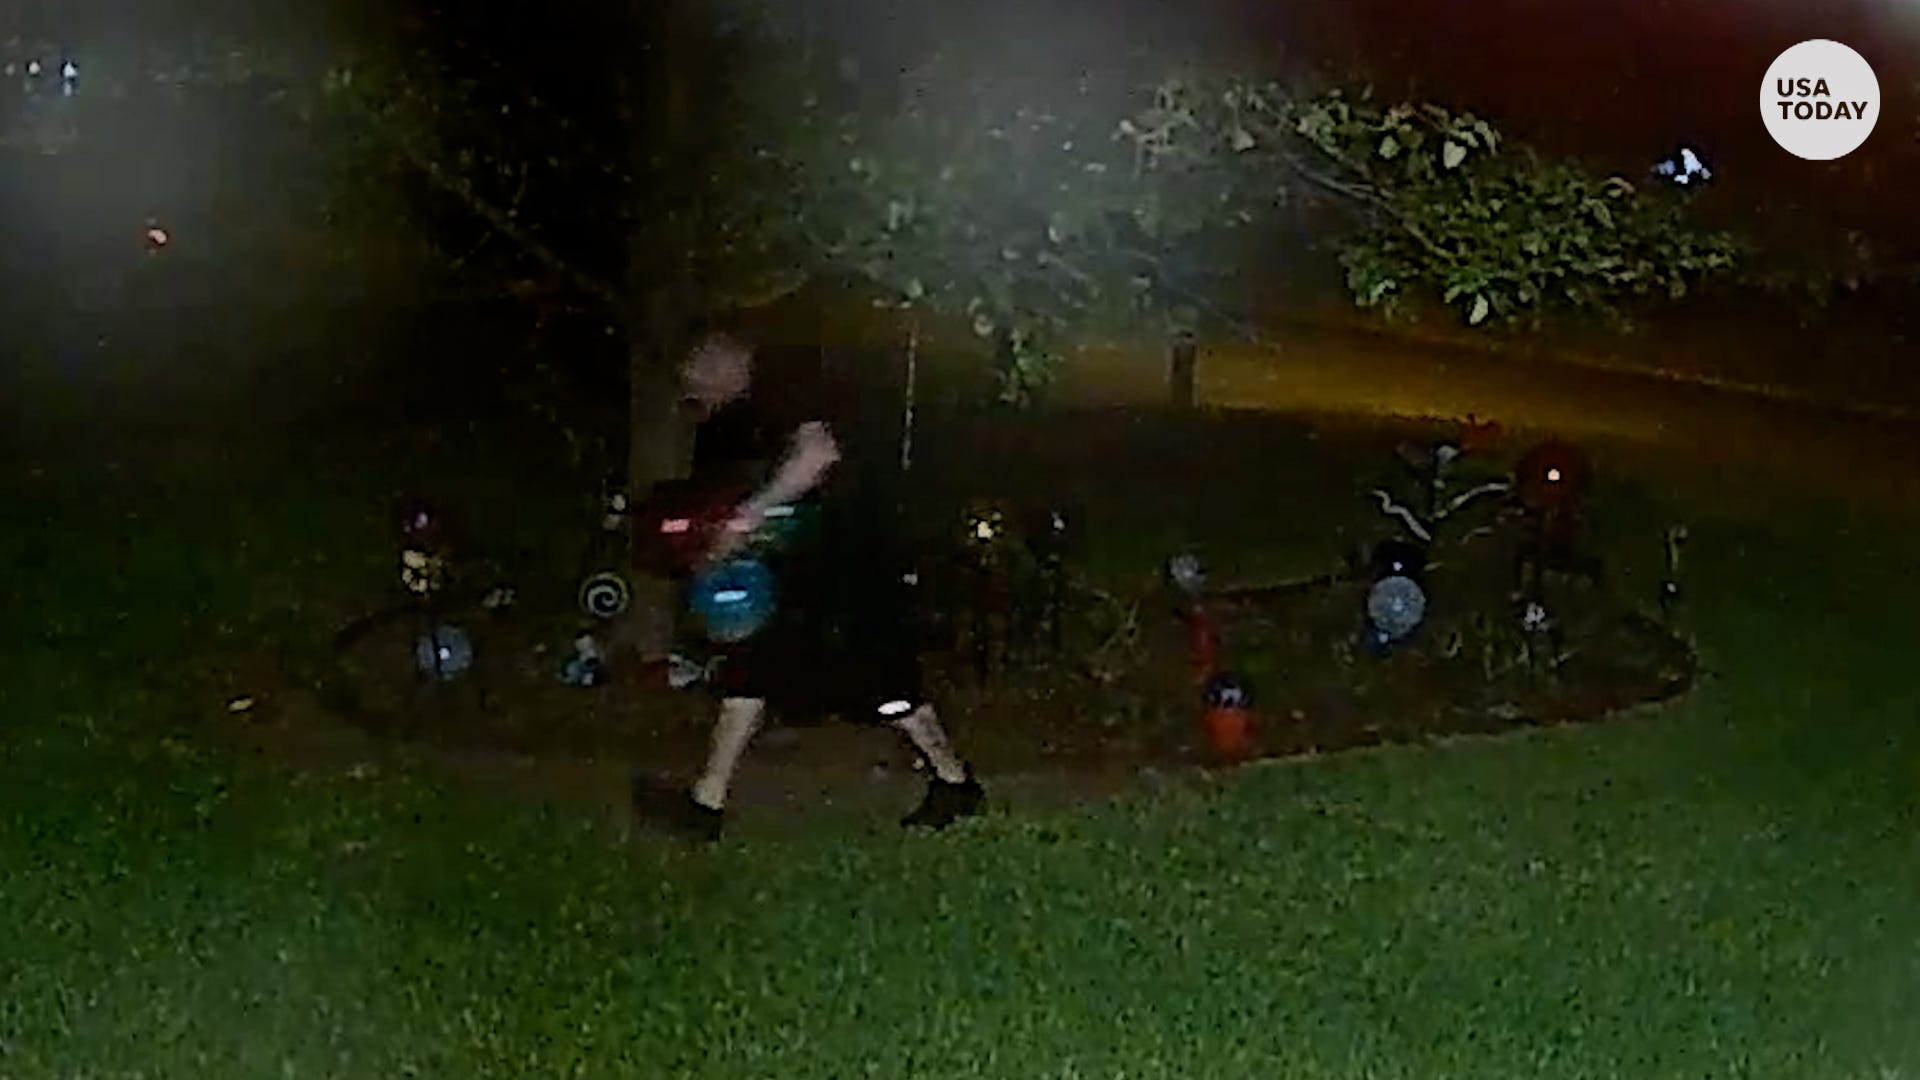 Ring camera catches thief stealing yard decor holding ashes of homeowner's parents